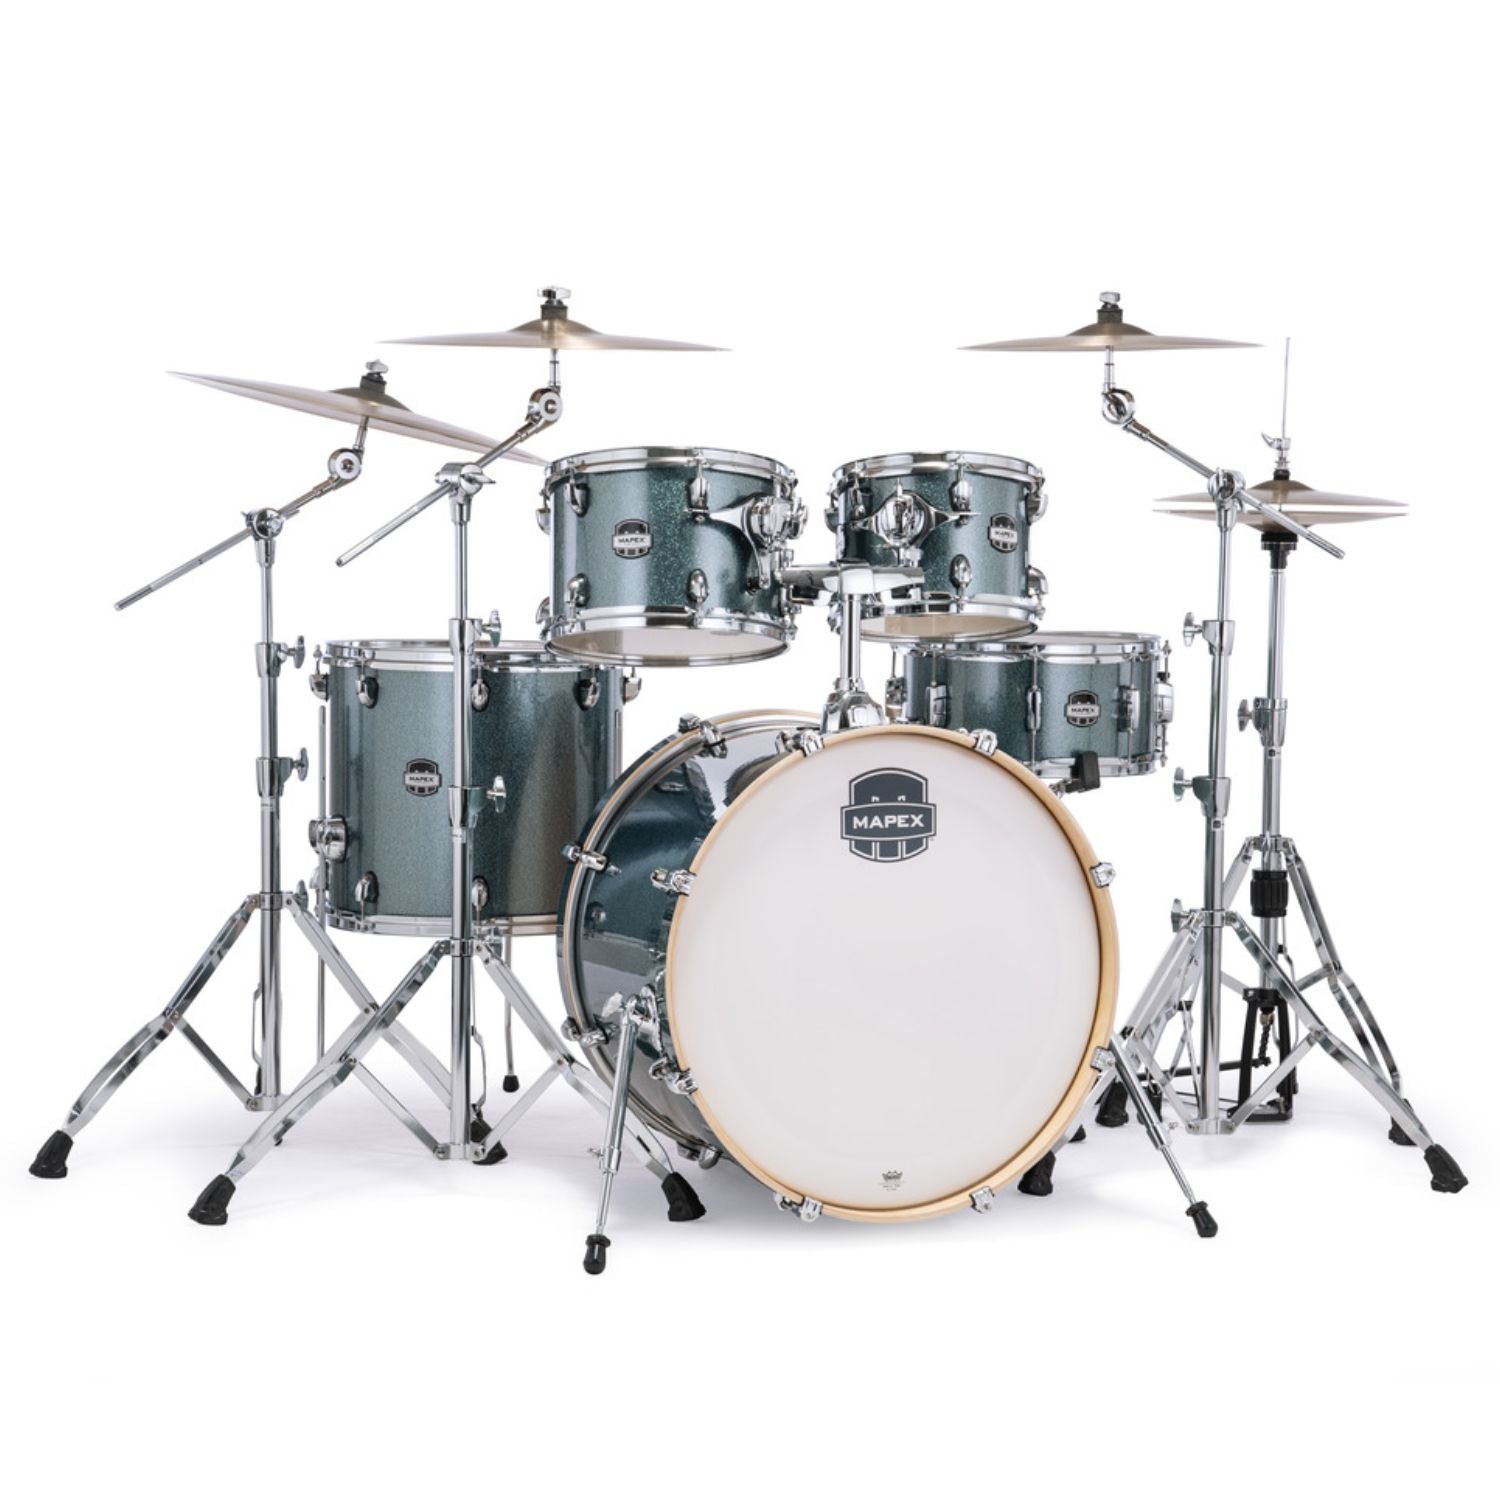 Trống Cơ Mapex Mars Birch MA529SF (22/10 - 12/16/14) + Hardware L4HPACK 400 Series + Cymbal PAISTE PST3 - Việt Music